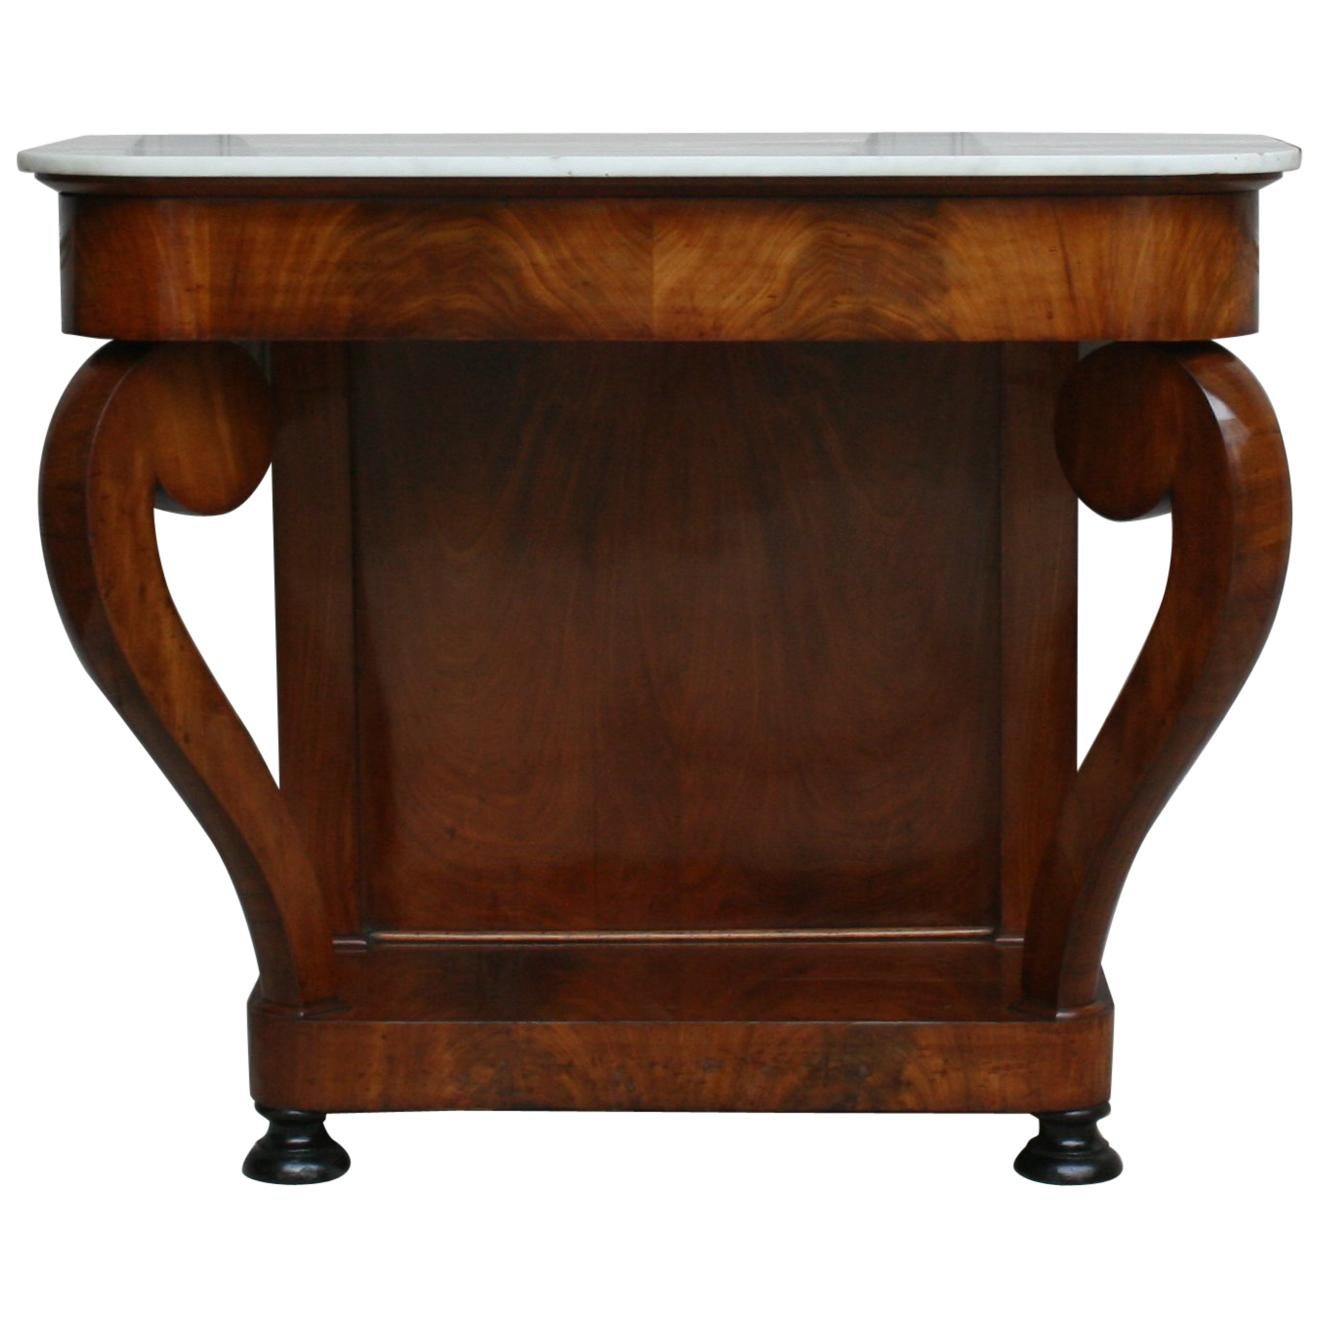 A antique French Louis-Philippe period mahogany veneer console from the mid-19th century with white marble top and 2 round black ebonized feet. Dovetailed wood construction. 
The console table is professionally re-polished by hand with shellac